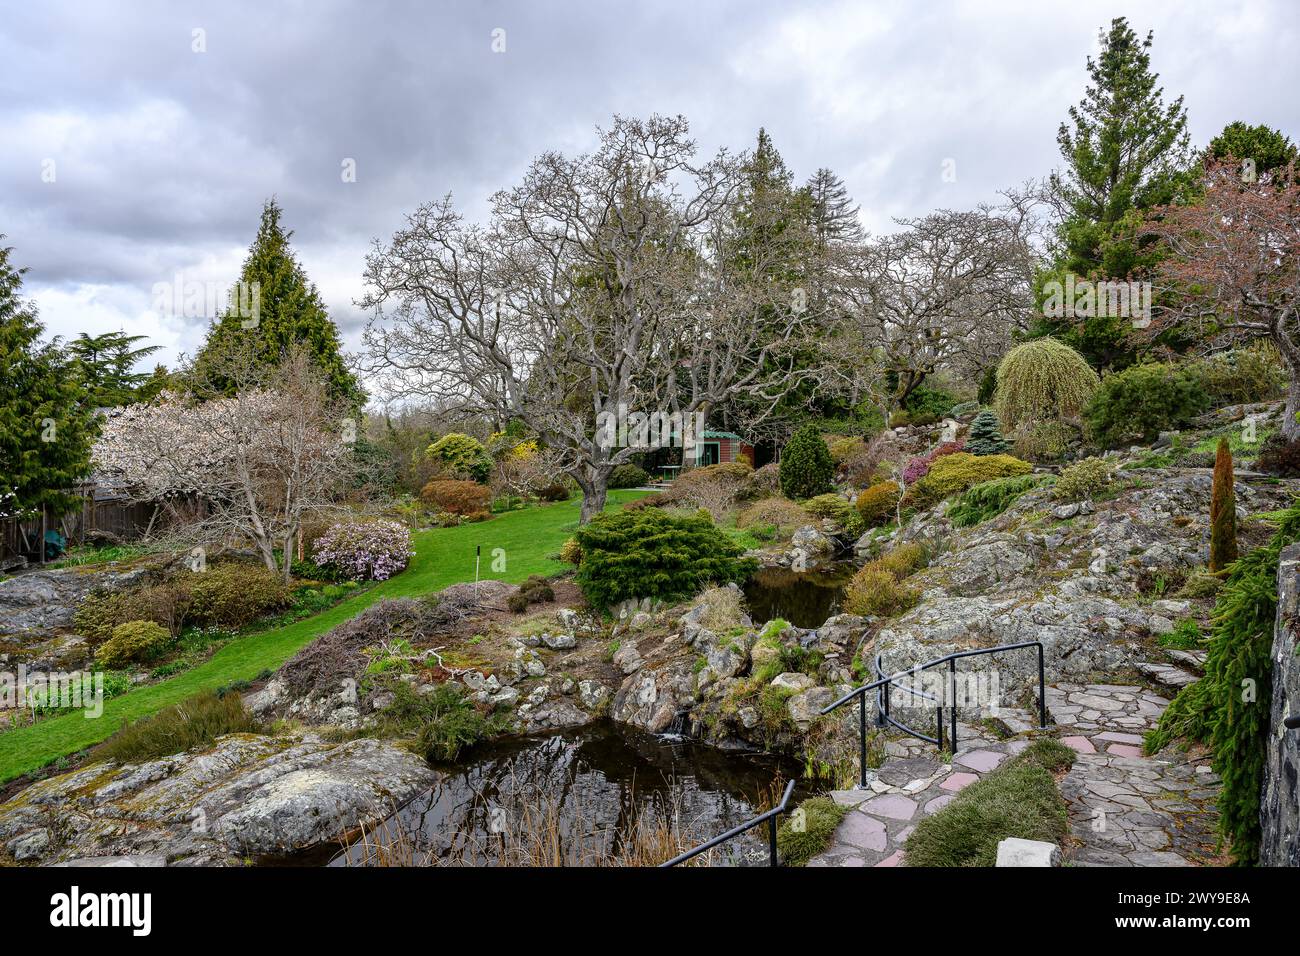 A scenic view of Abkhazi Garden in Victoria British Columbia on a cloudy day Stock Photo